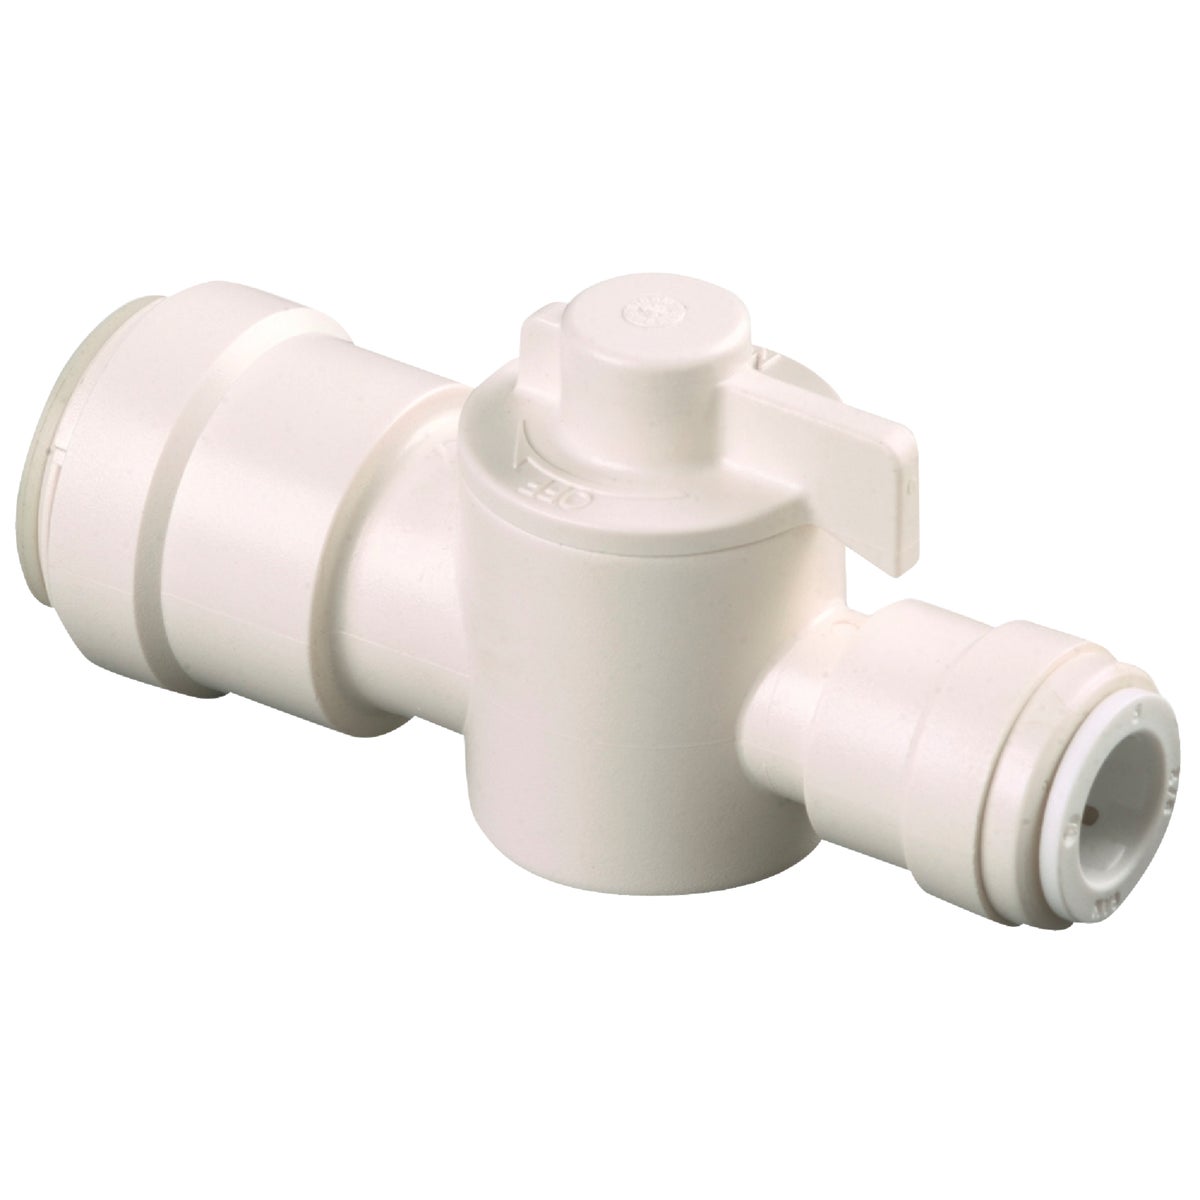 Item 447289, CTS quick connect shutoff valve (push type) for PEX, copper, CPVC, and 